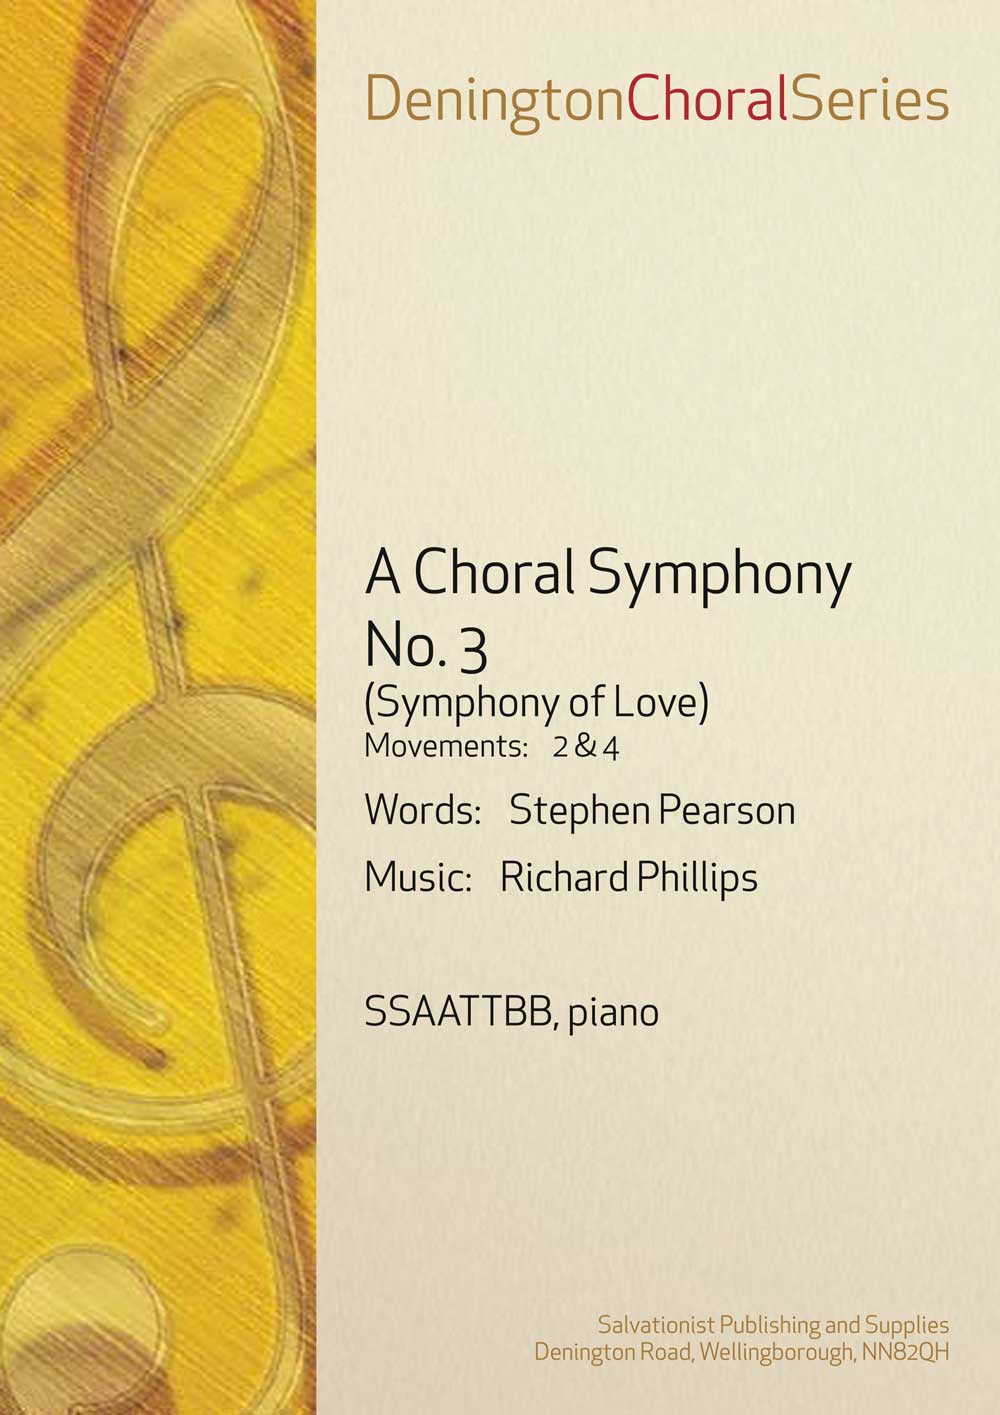 Choral Symphony No.3, Movements 2 & 4 (SSAATTBB Choral Octavo)